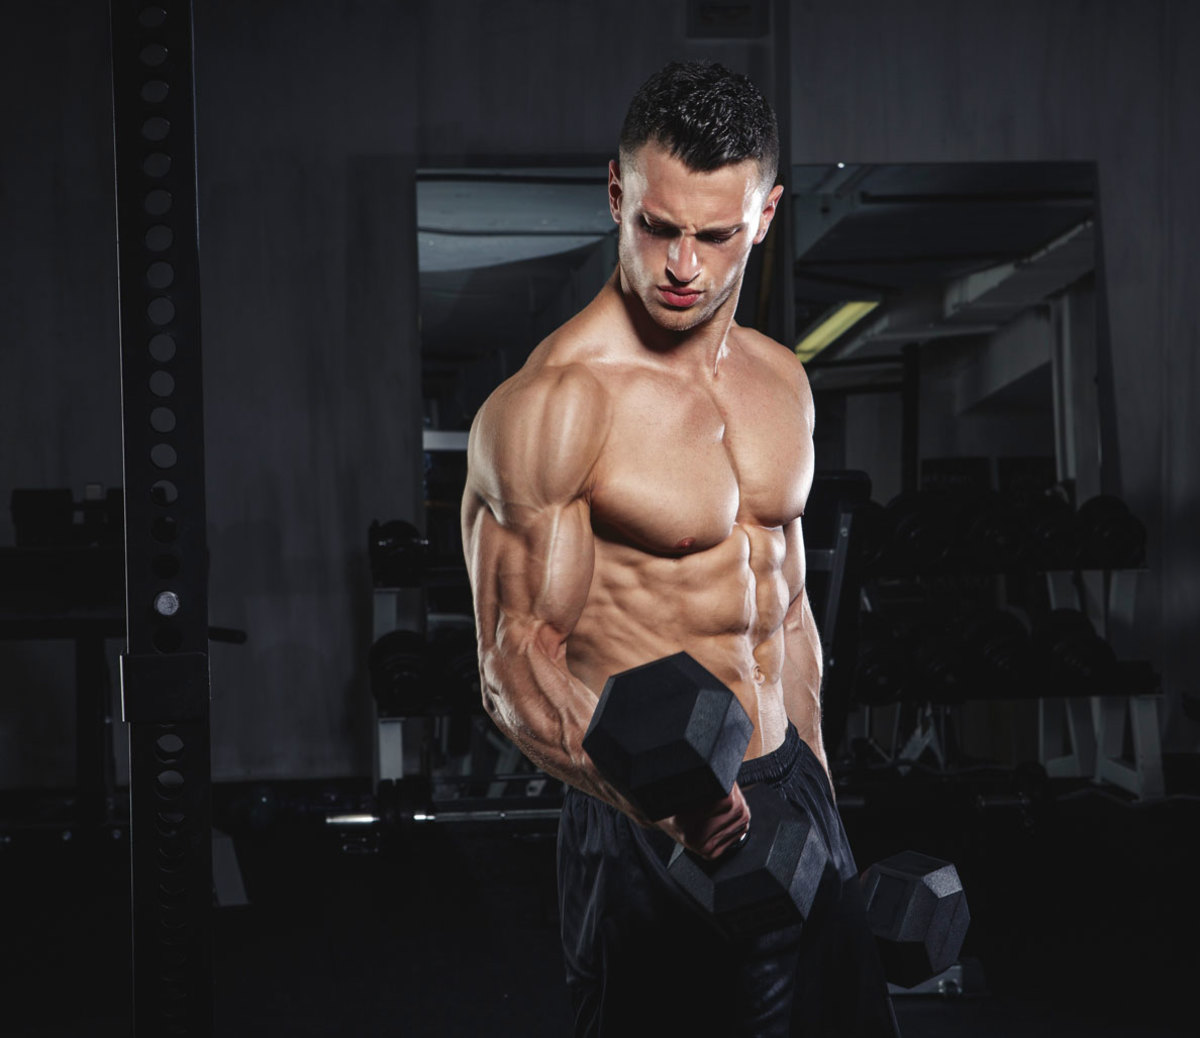 How To Get JACKED & SHREDDED Arms With 6 Must-Do Arm Exercises